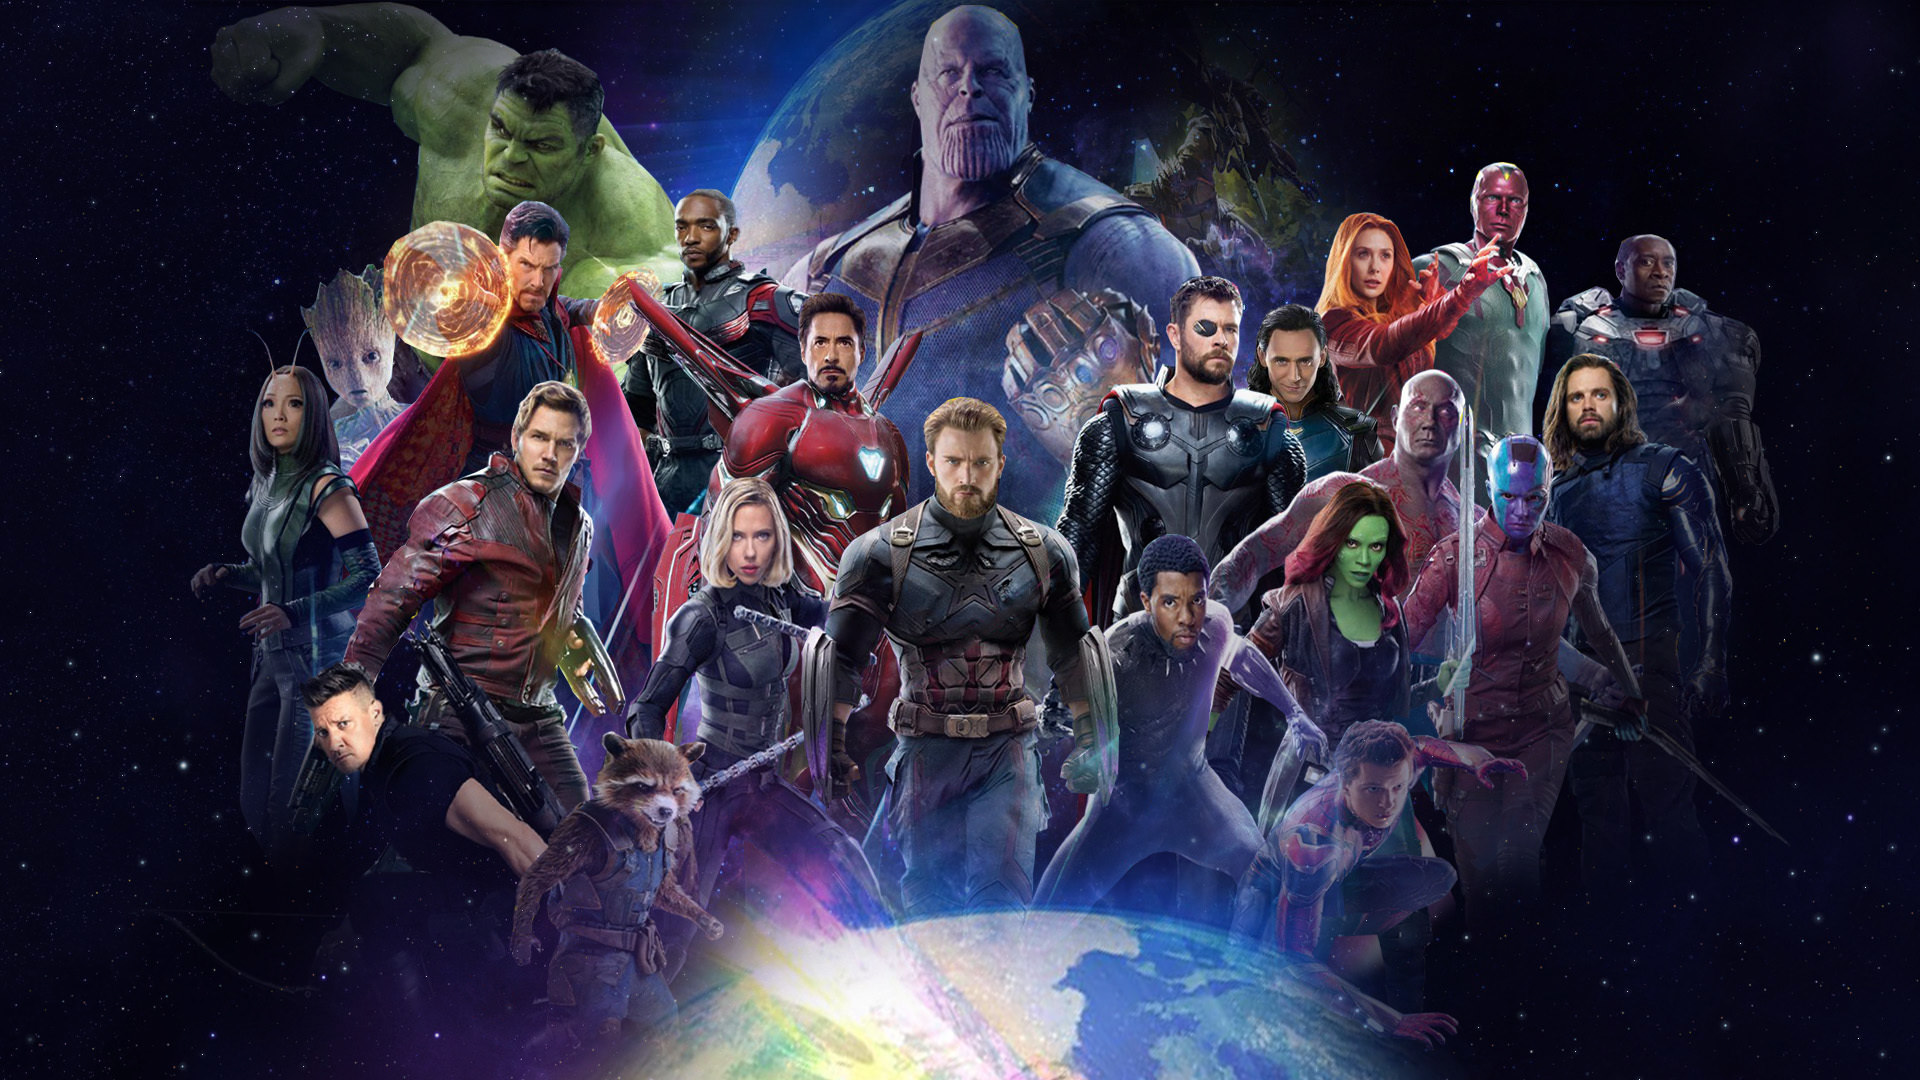 19x1080 Avengers Infinity War 18 All Characters Fan Poster 1080p Laptop Full Hd Wallpaper Hd Movies 4k Wallpapers Images Photos And Background Wallpapers Den